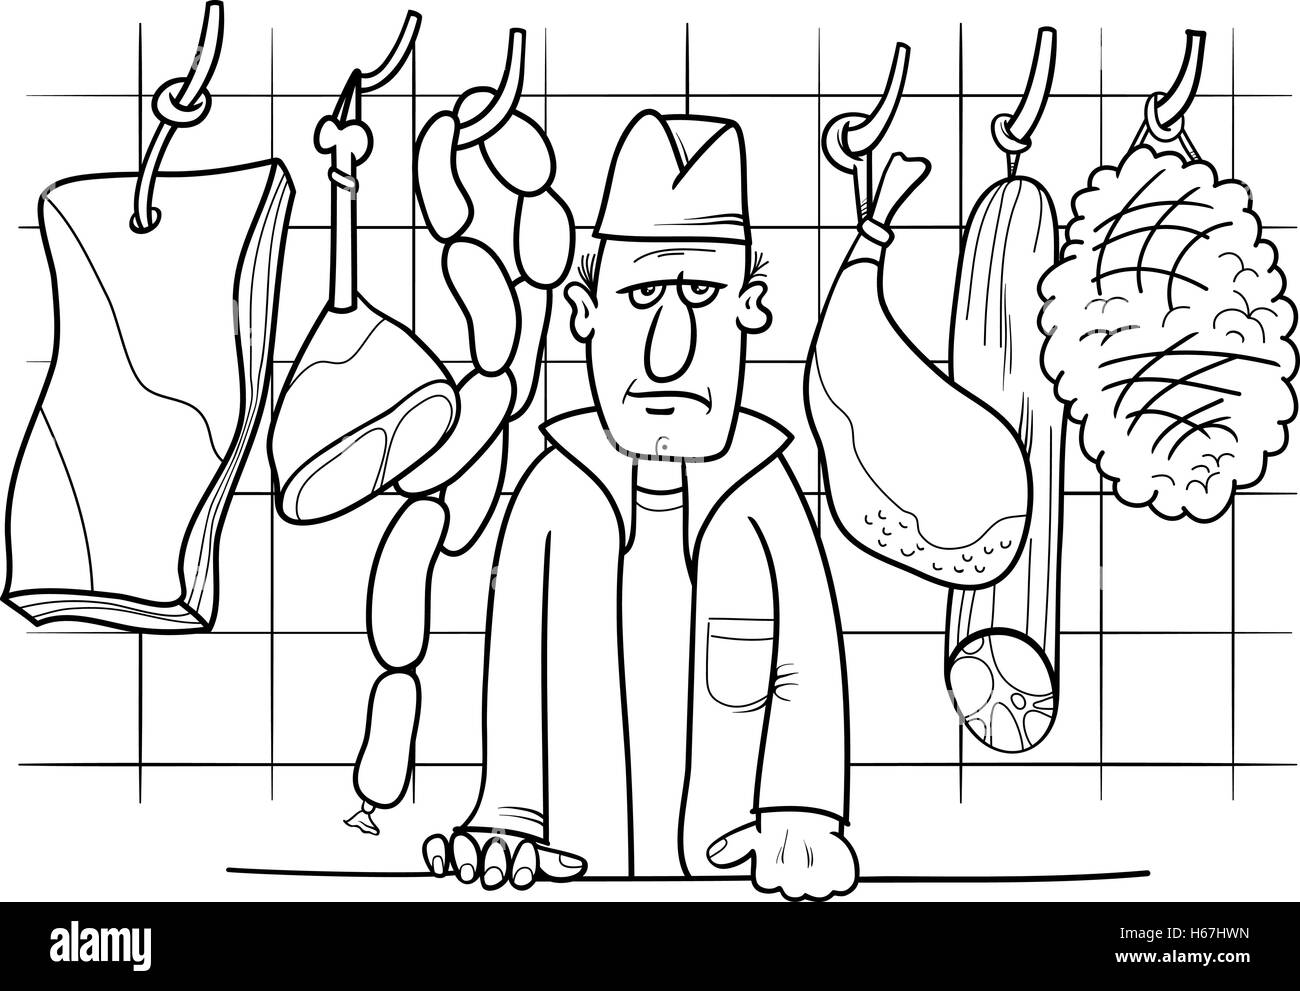 Black and White Cartoon Illustration of Butcher in his Shop with Meat Food Objects Coloring Page Stock Vector